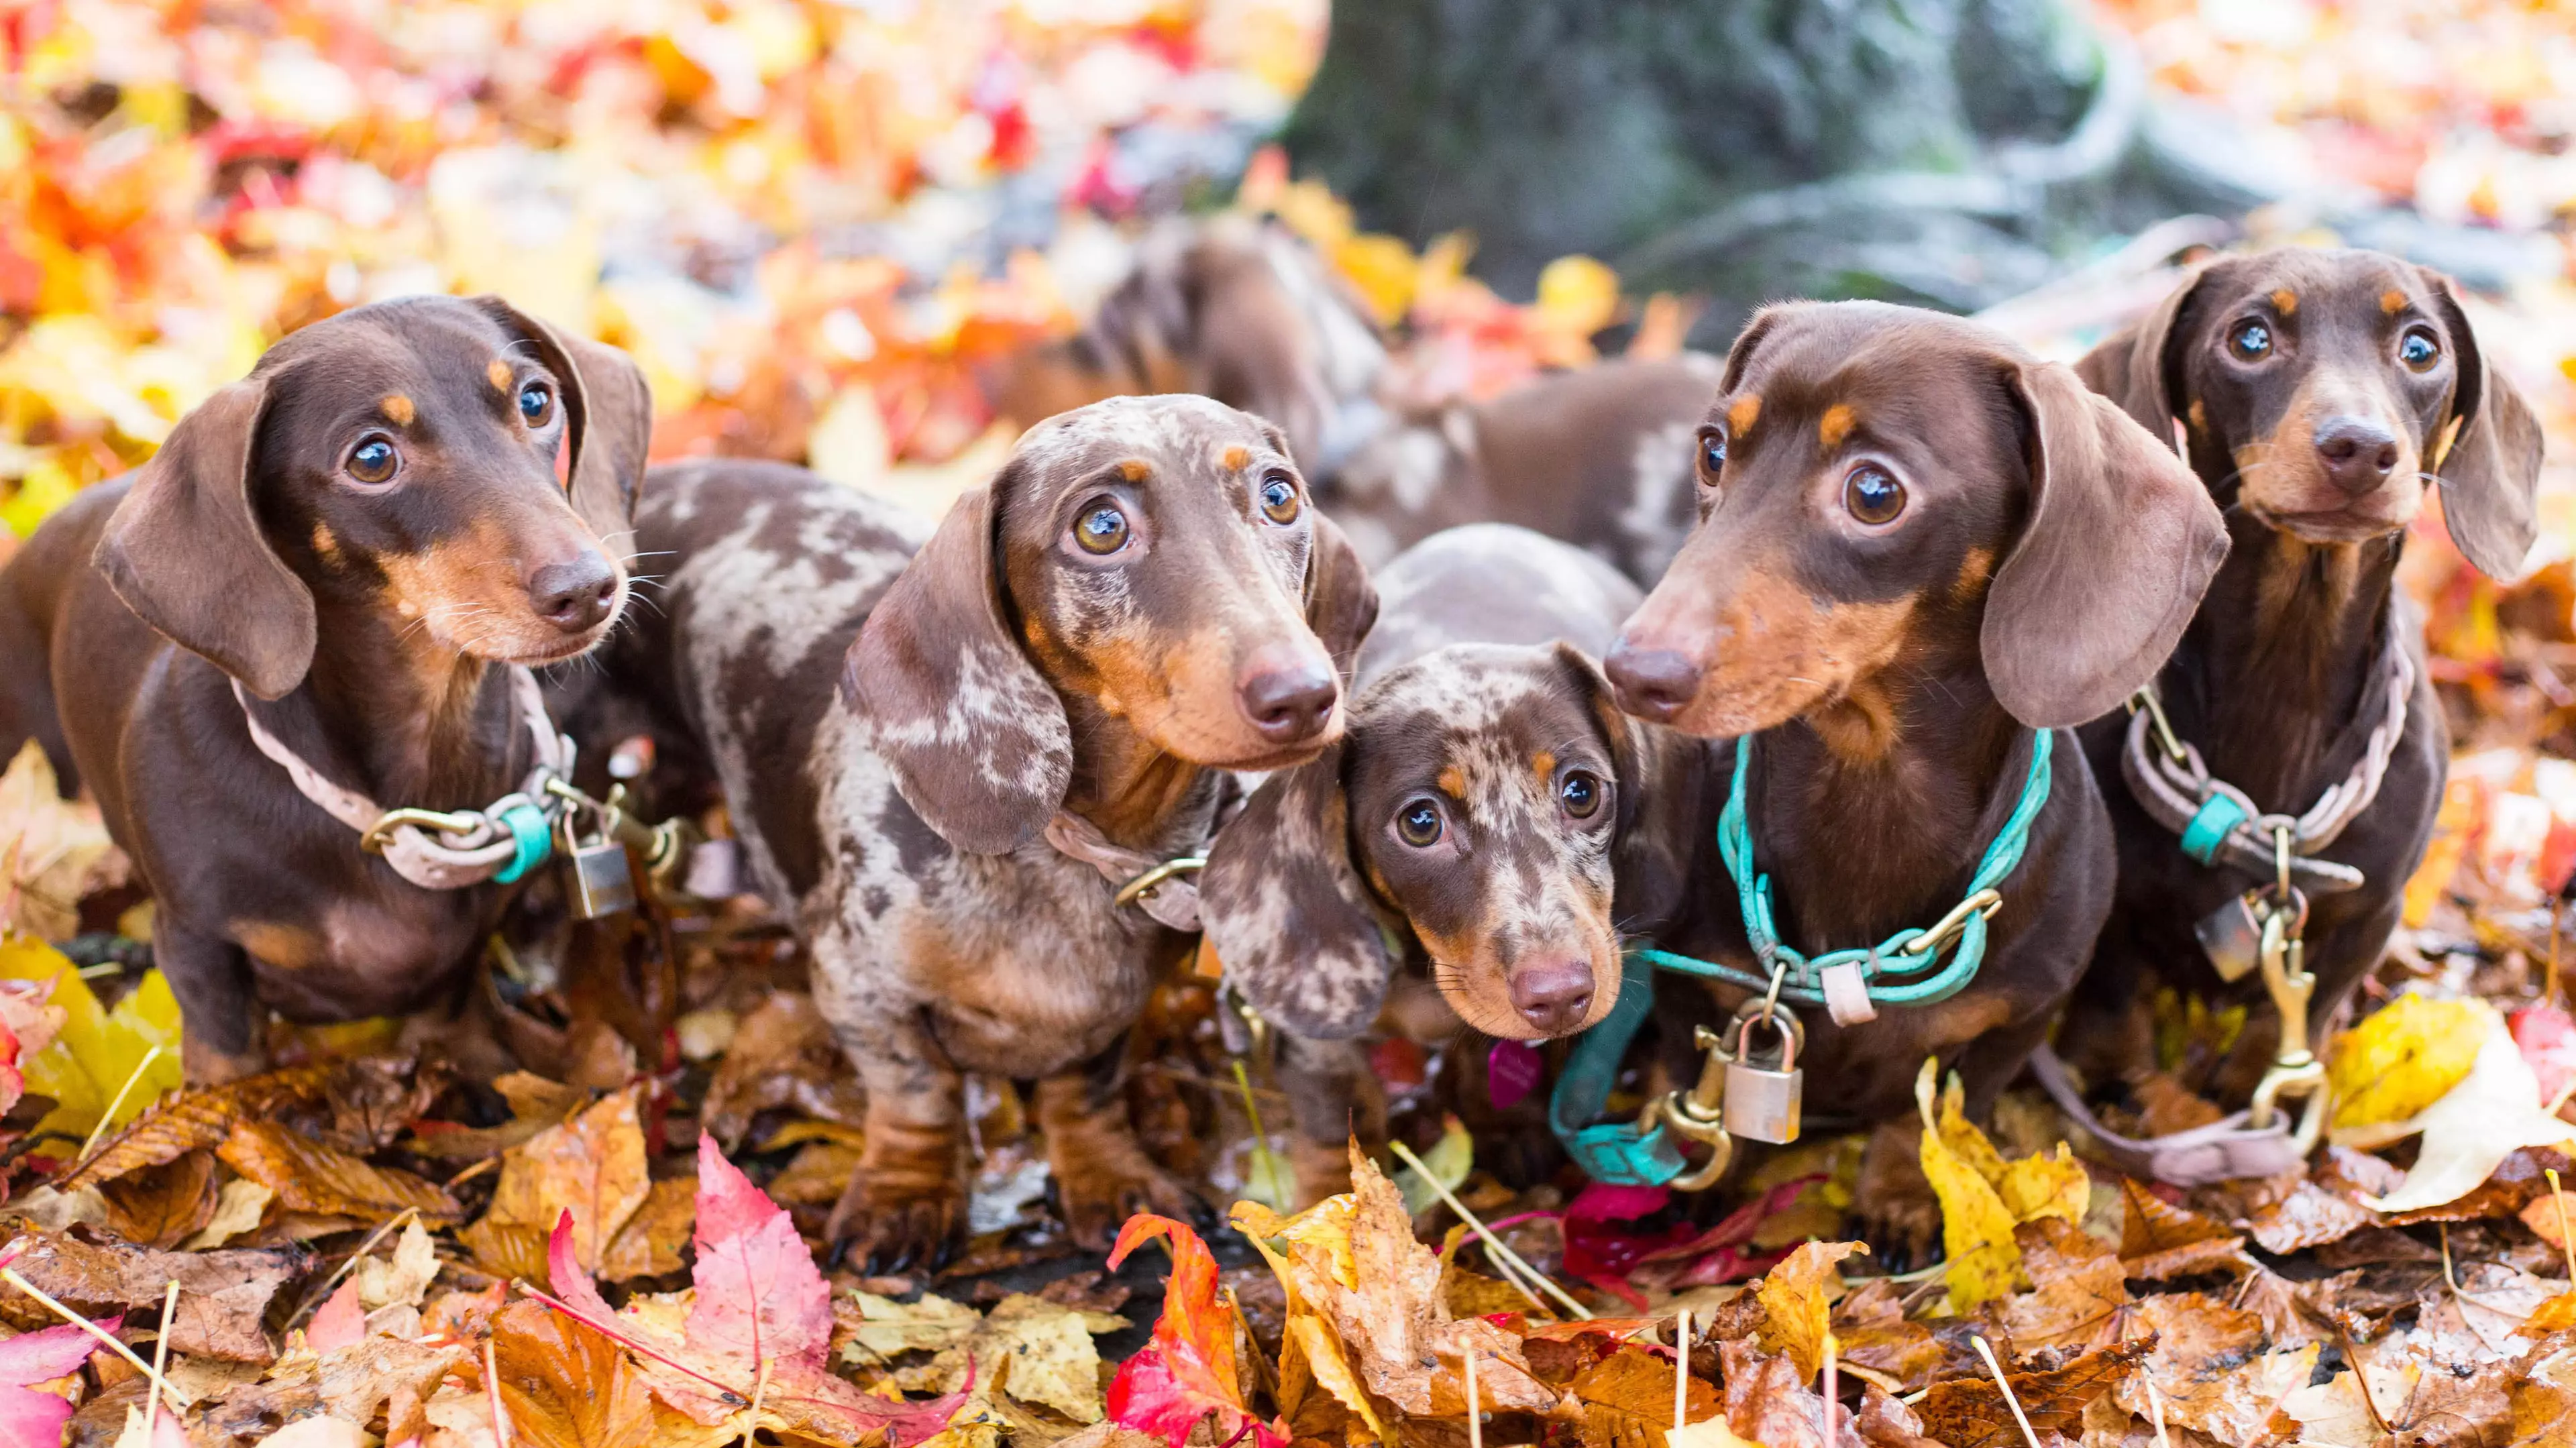 Woman Spends £800 A Month On Outfits And Activities For Her Sausage Dog Squad